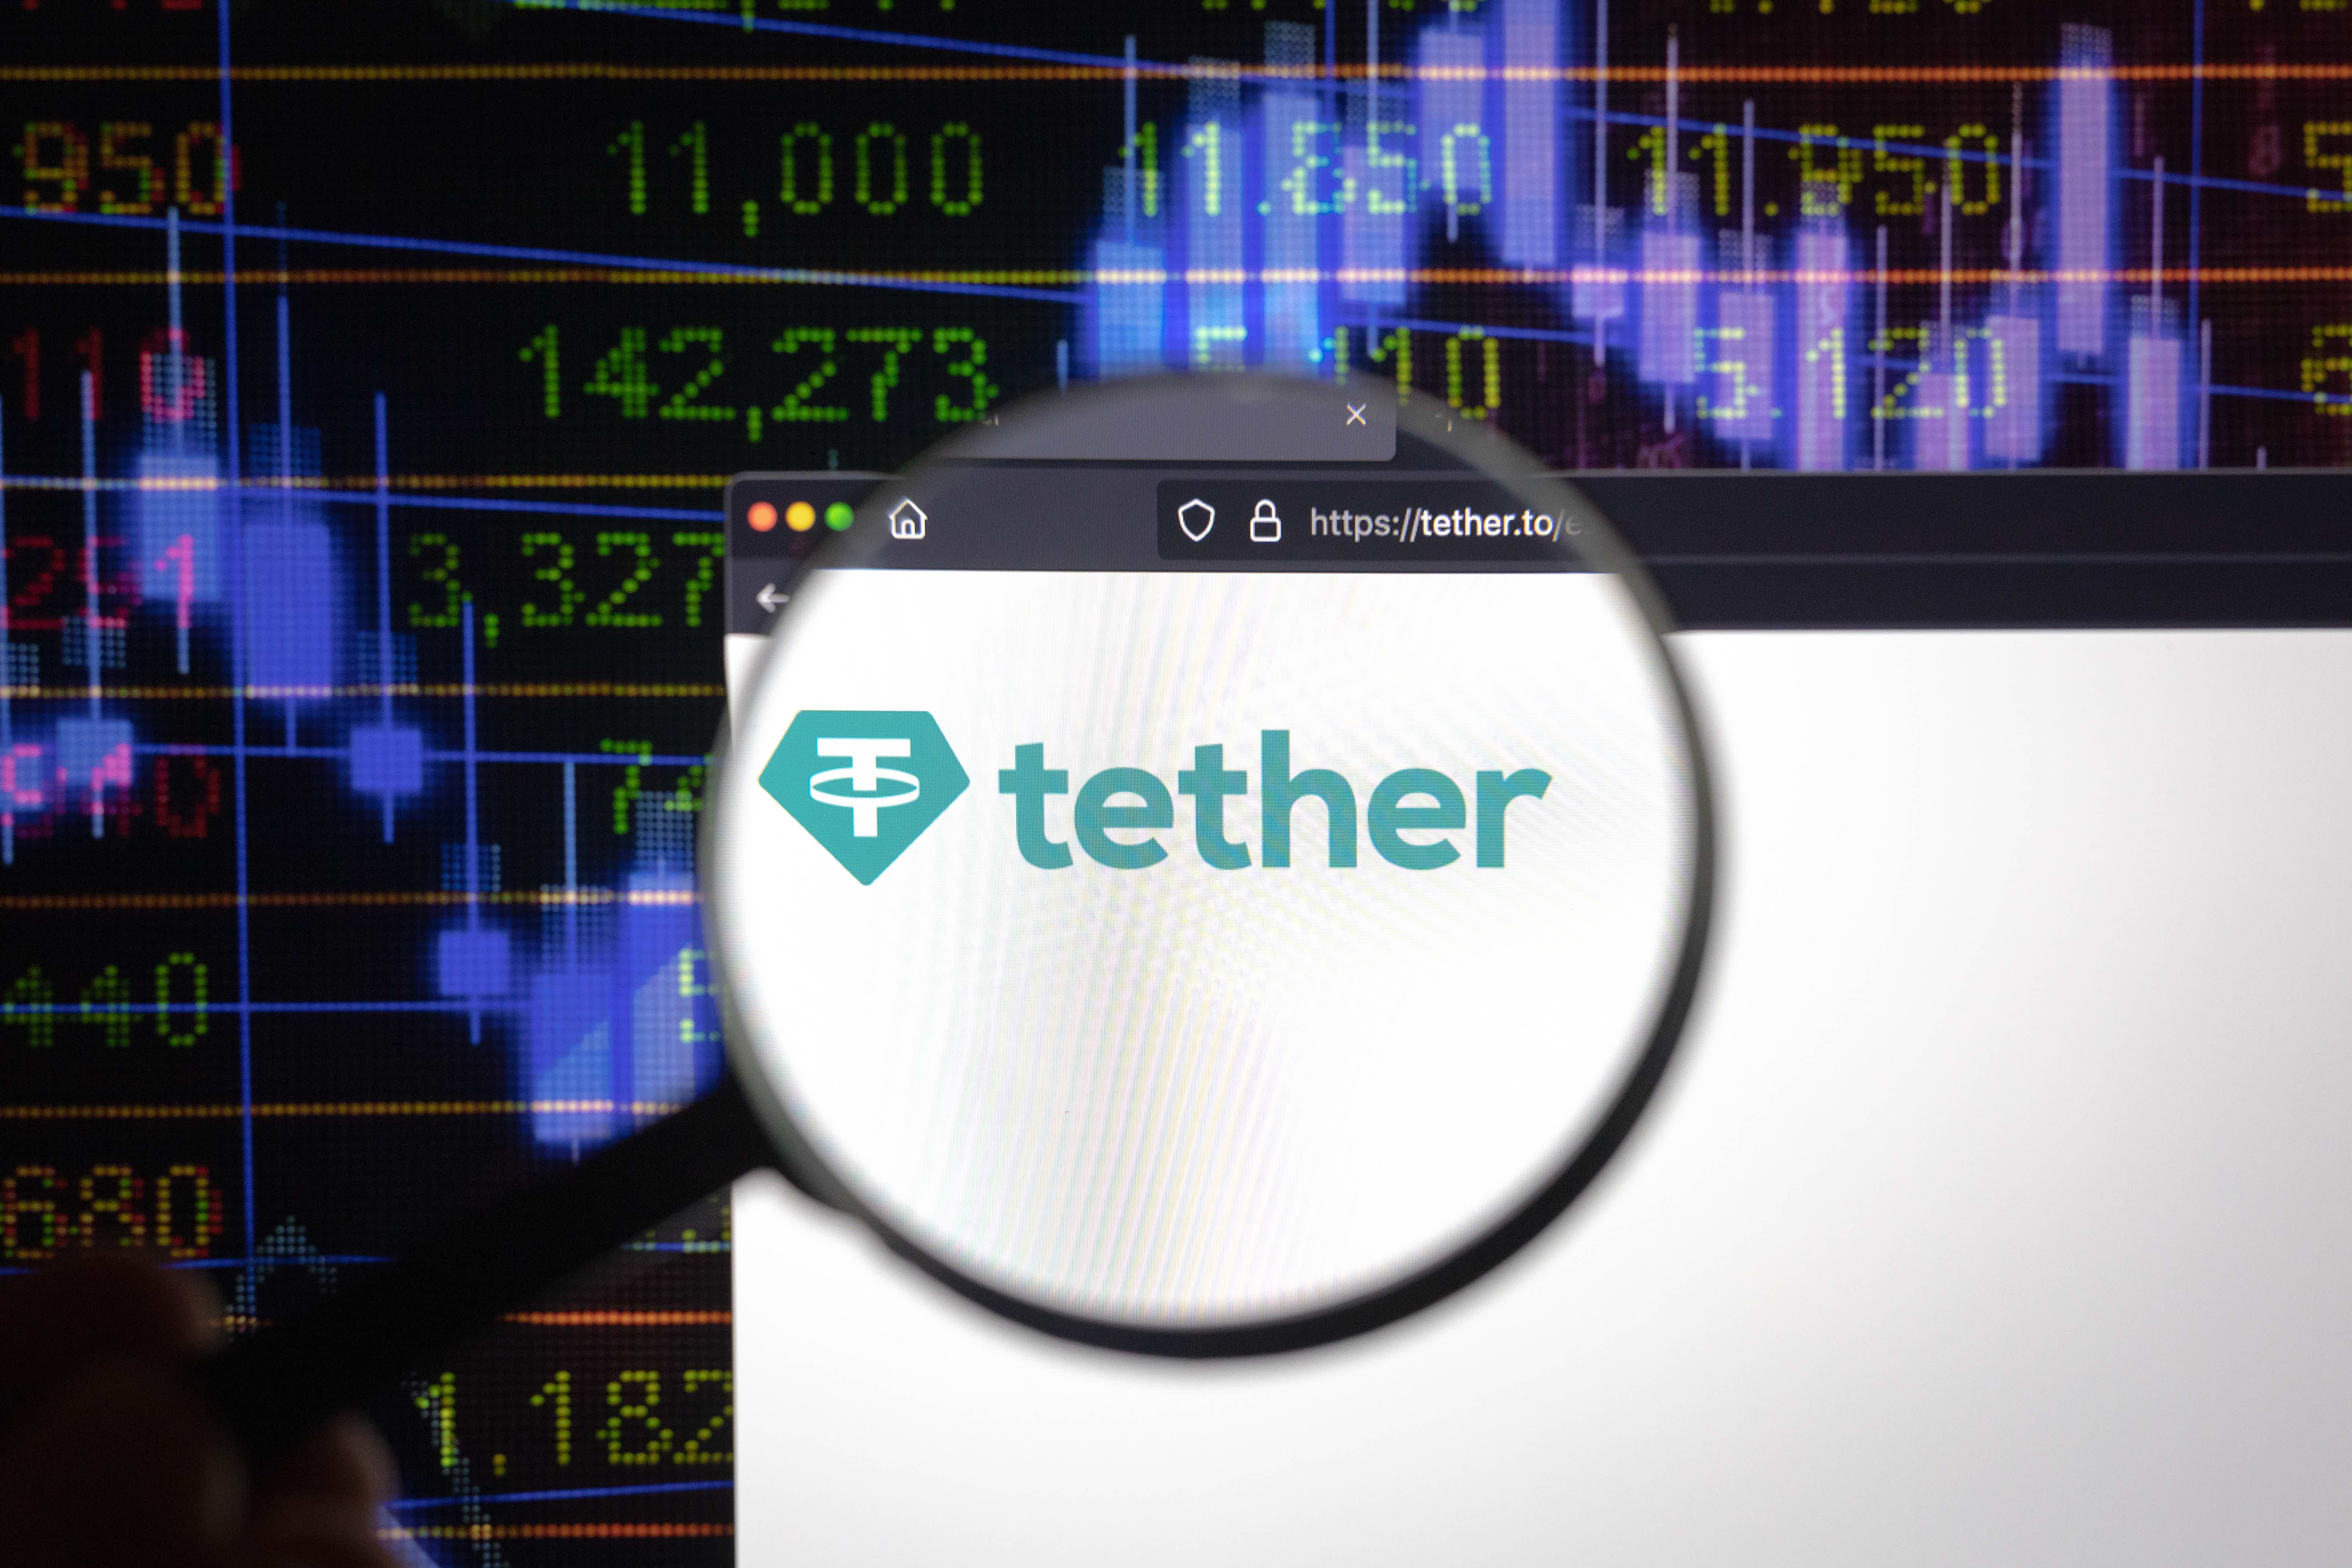 See how to buy Tether online. Source: AdobeStock.